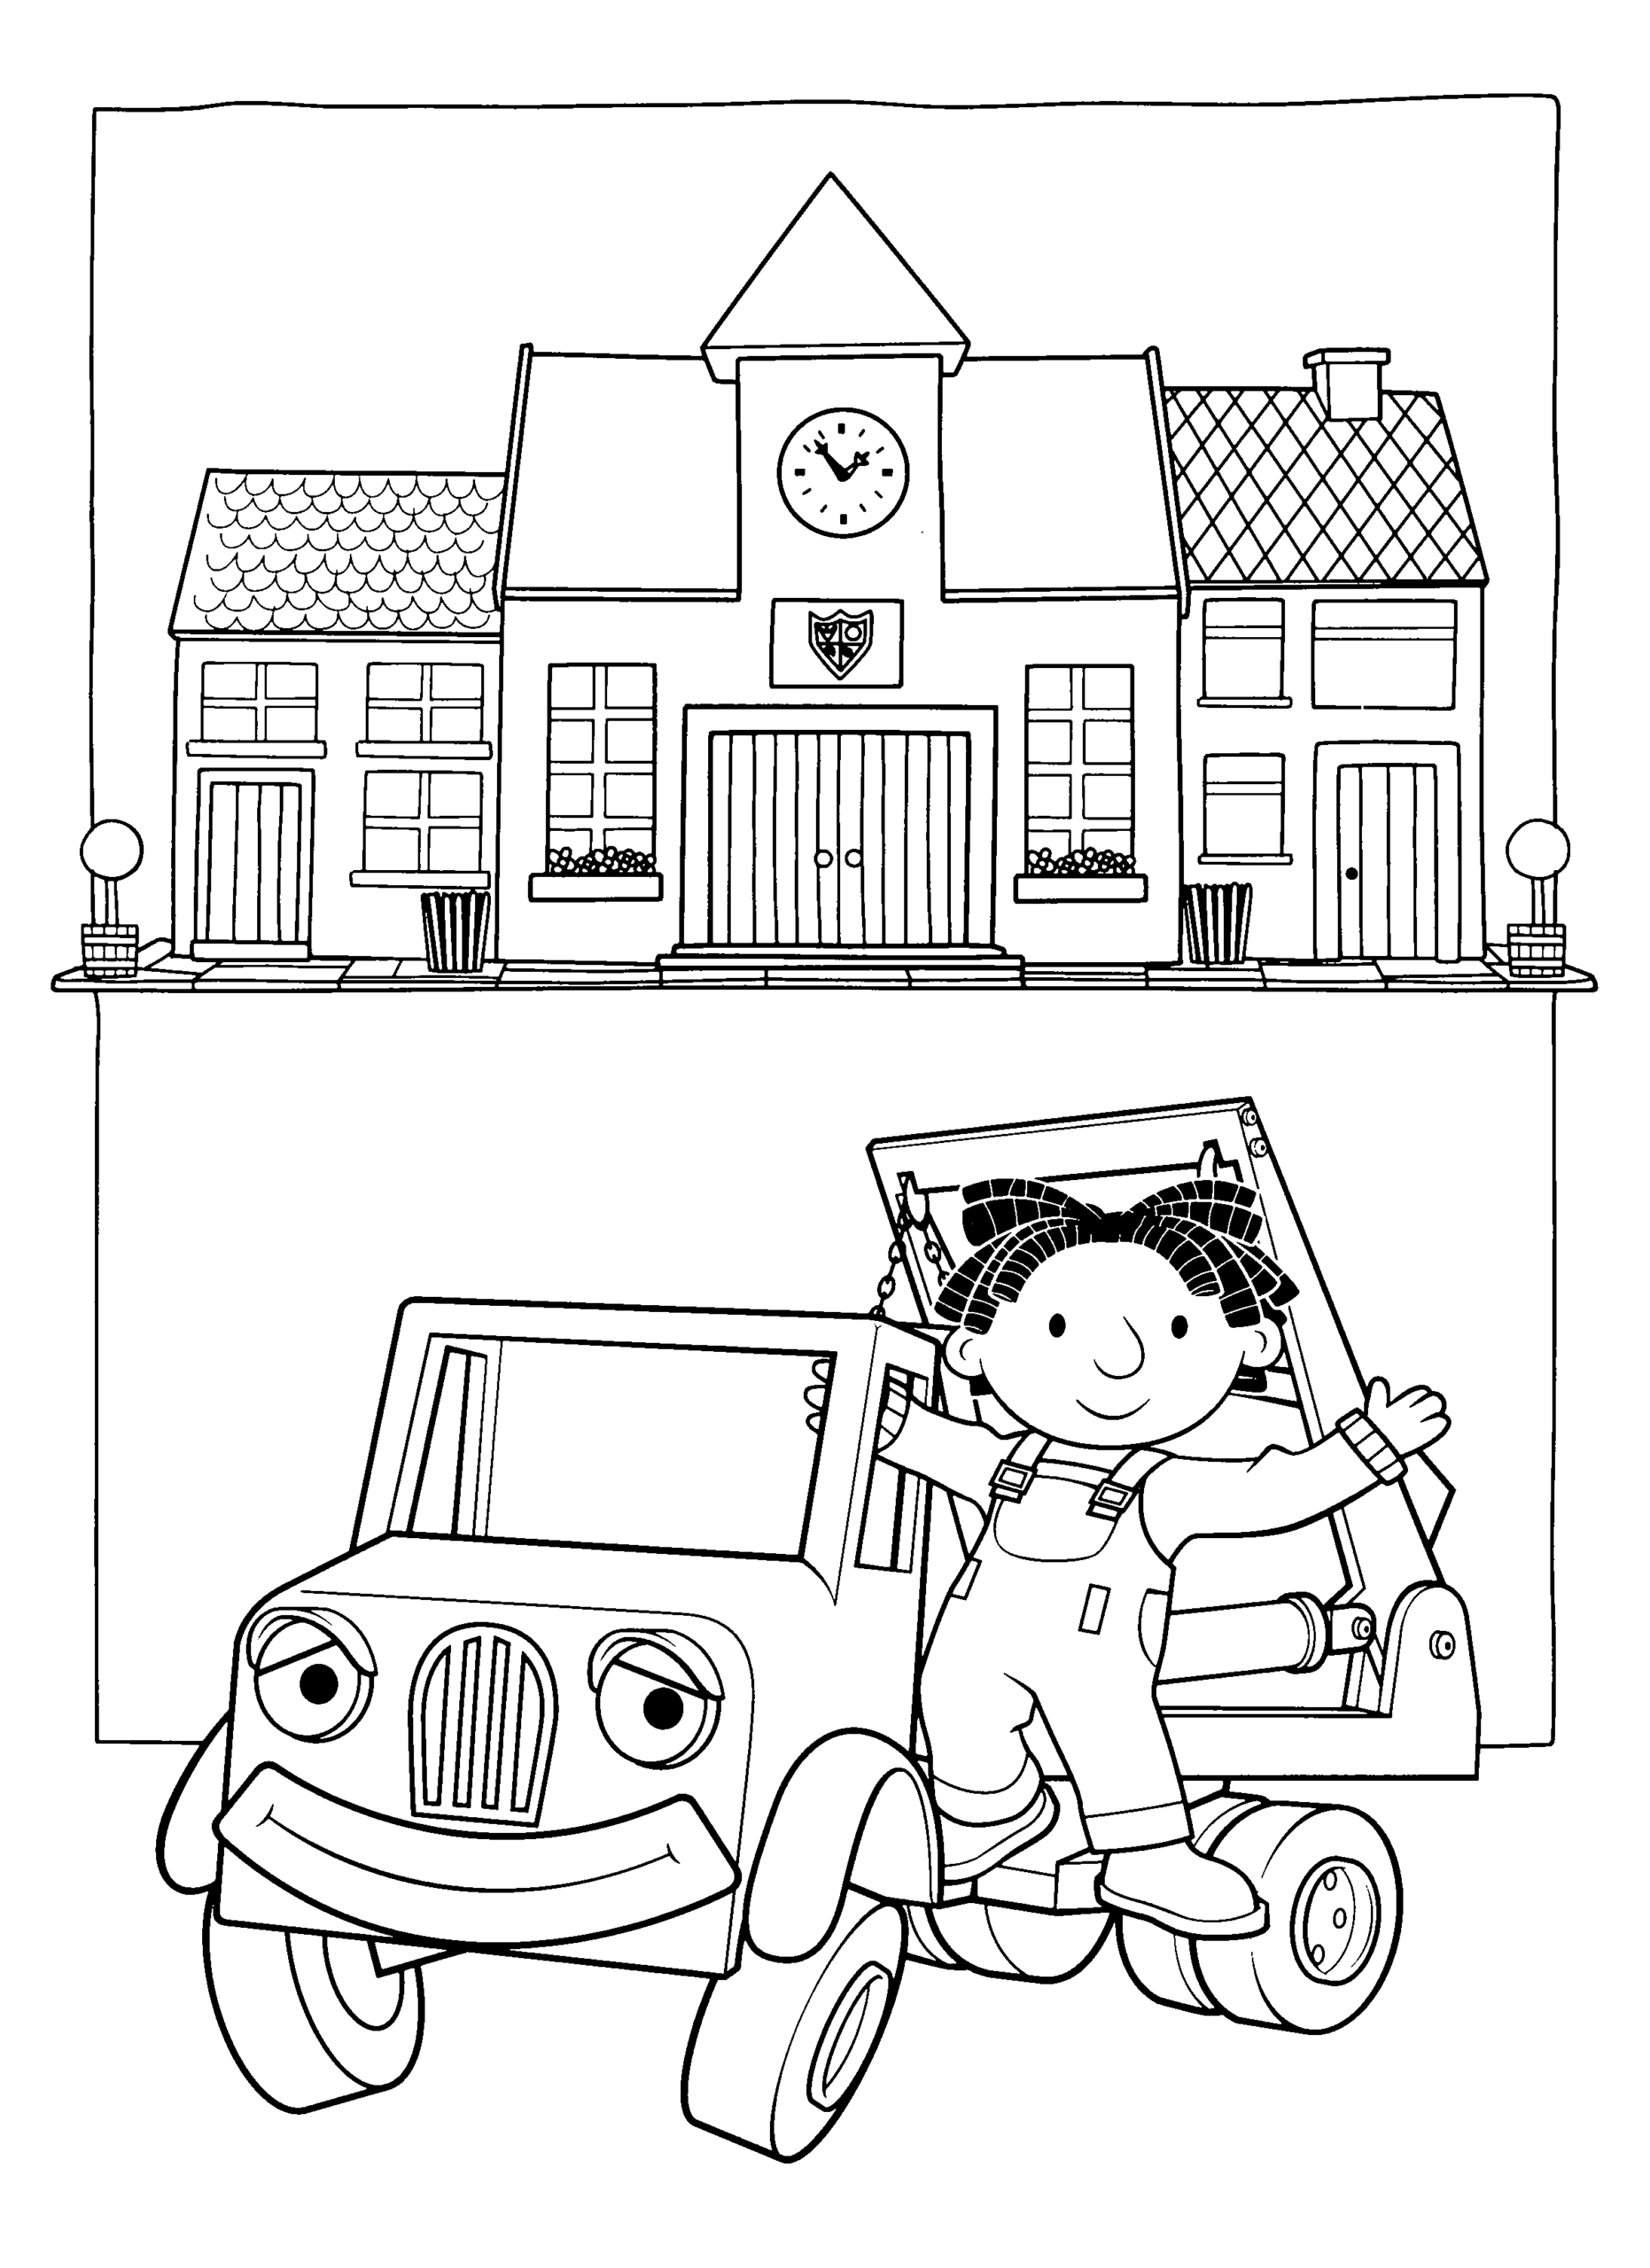 Bob the Builder Coloring Pages TV Film bob der baumeister Printable 2020 00949 Coloring4free